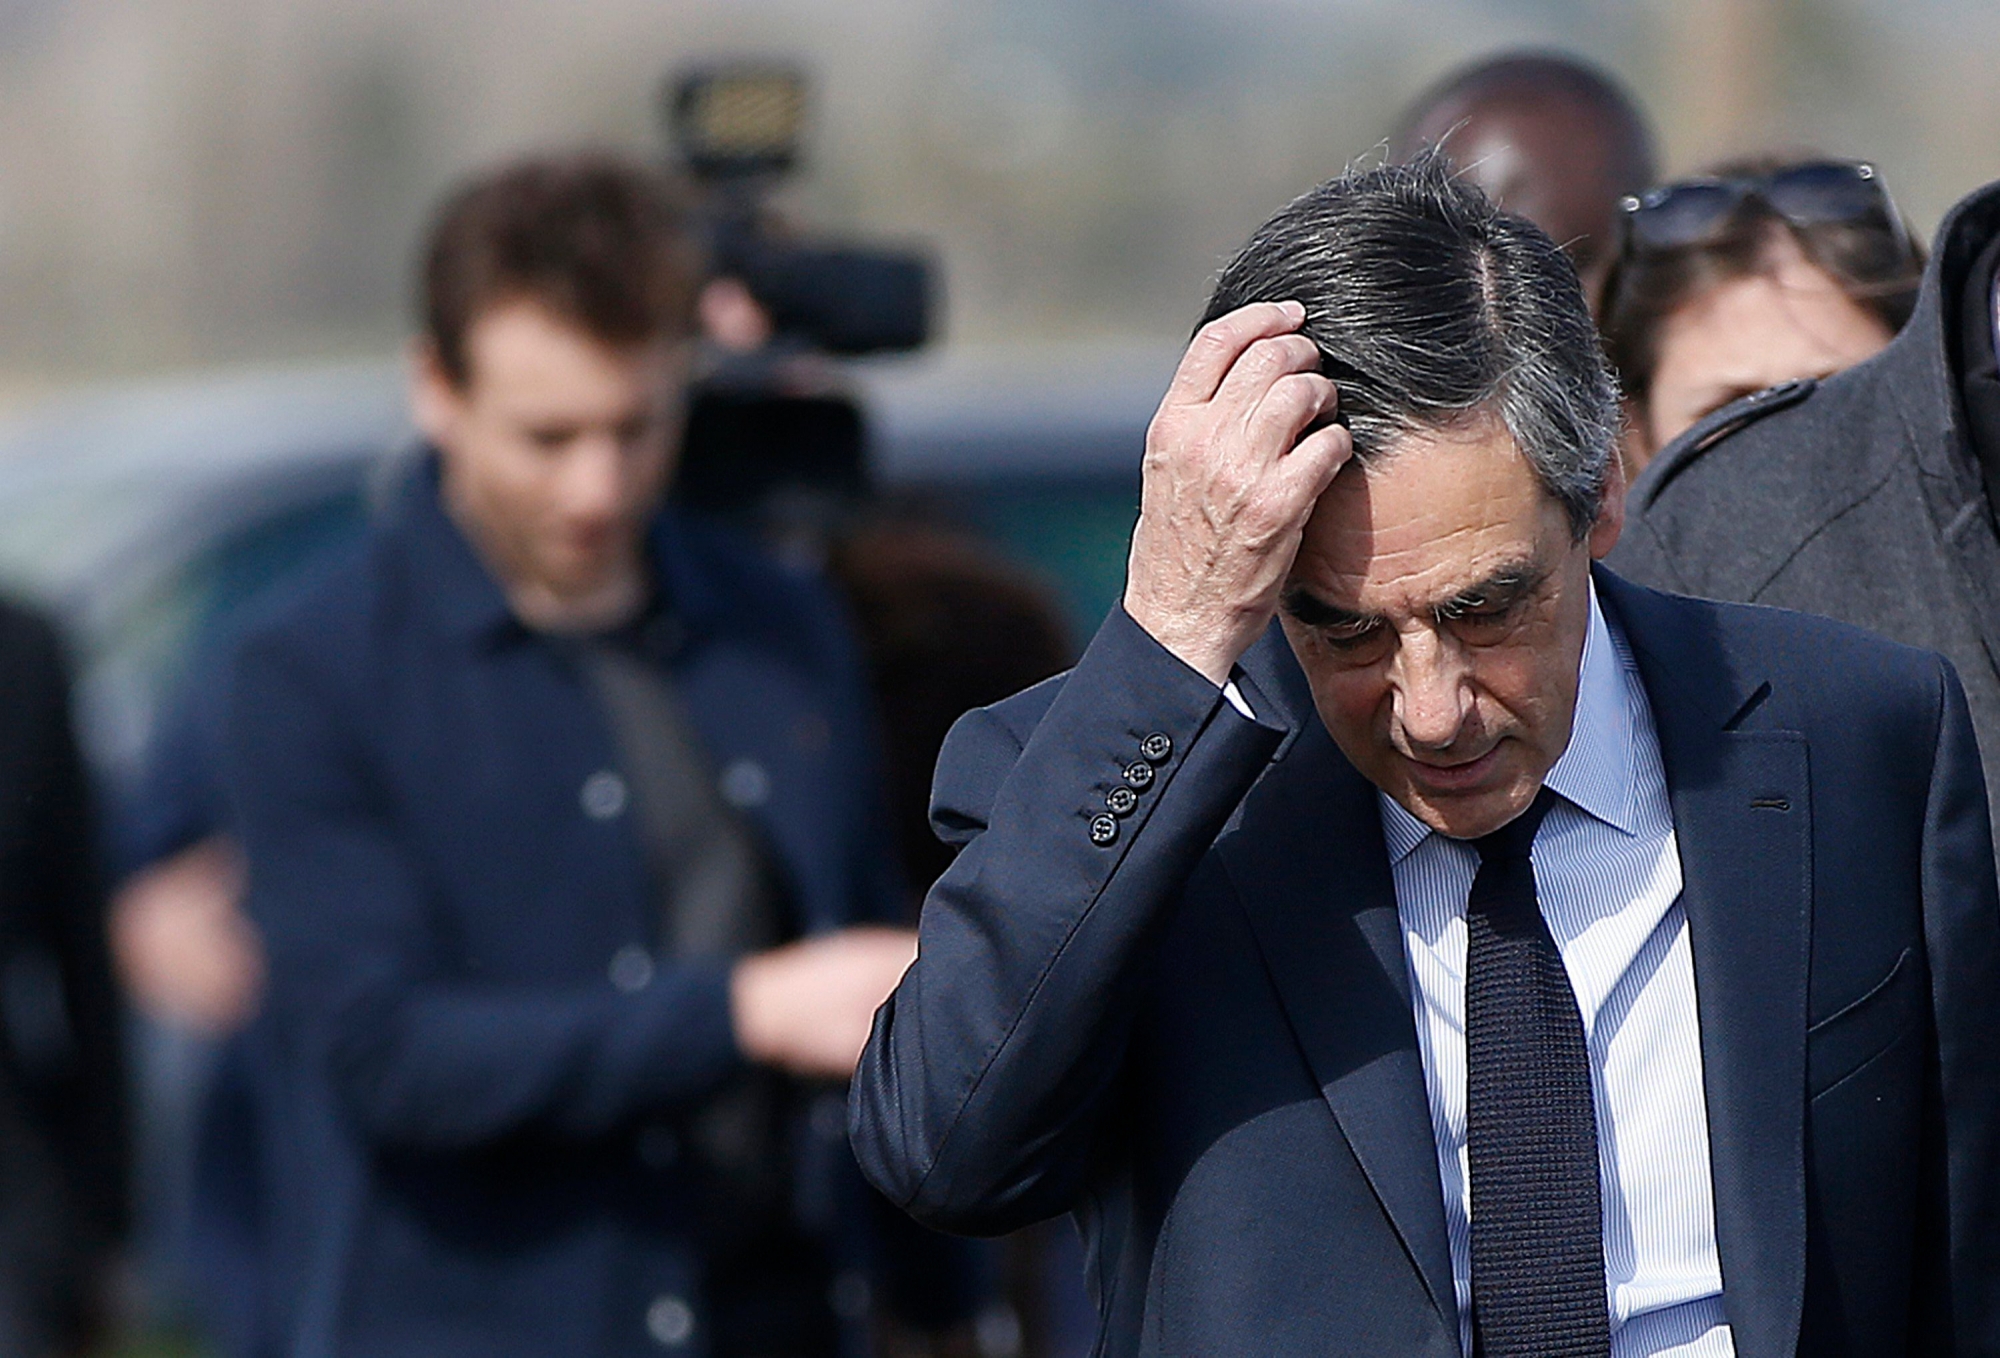 epa05847763 (FILE) A file picture dated 02 March 2017 shows Les Republicans party candidate for the 2017 presidential election Francois Fillon visiting a vineyard with  wineproducers in Nimes, southern France. Fillon's lawyer announced on 14 March 2017 that Francois Fillon was officially charged for several offences including misuse of public funds over the 'fake jobs' scandal.  EPA/GUILLAUME HORCAJUELO (FILE) FRANCE ELECTIONS FILLON